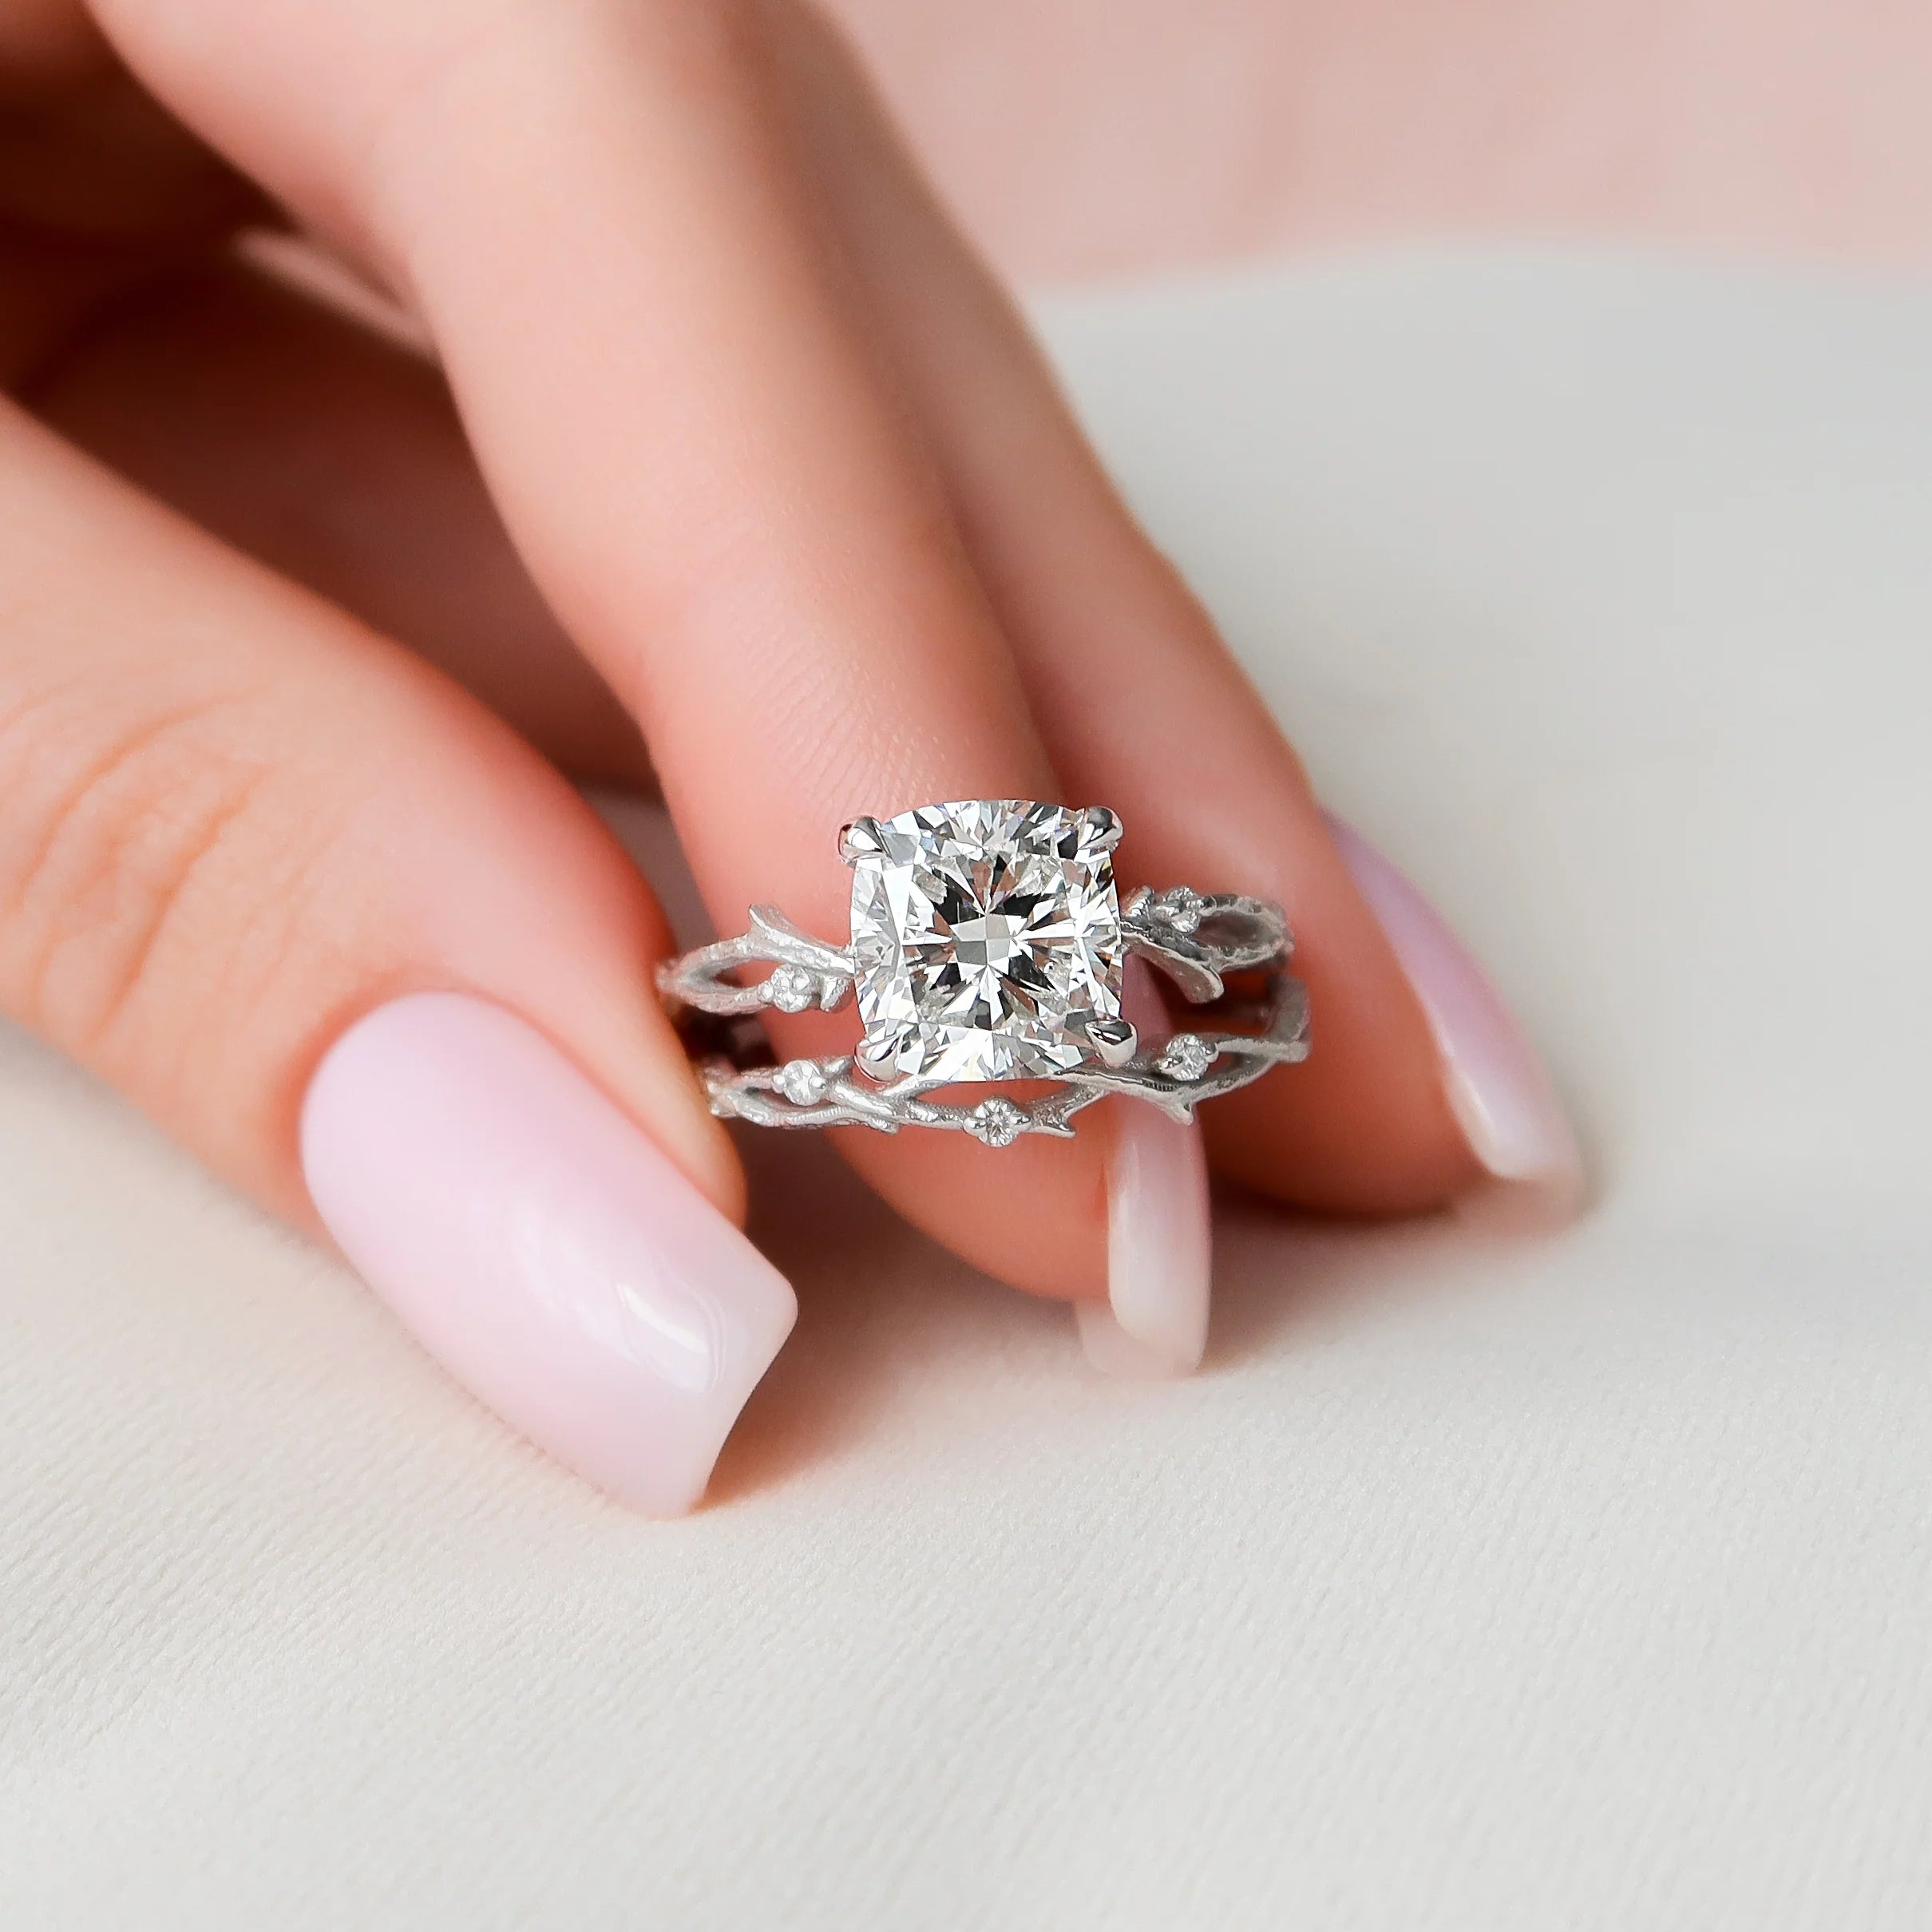 Everything You Need to Know About Cushion Cut Diamonds